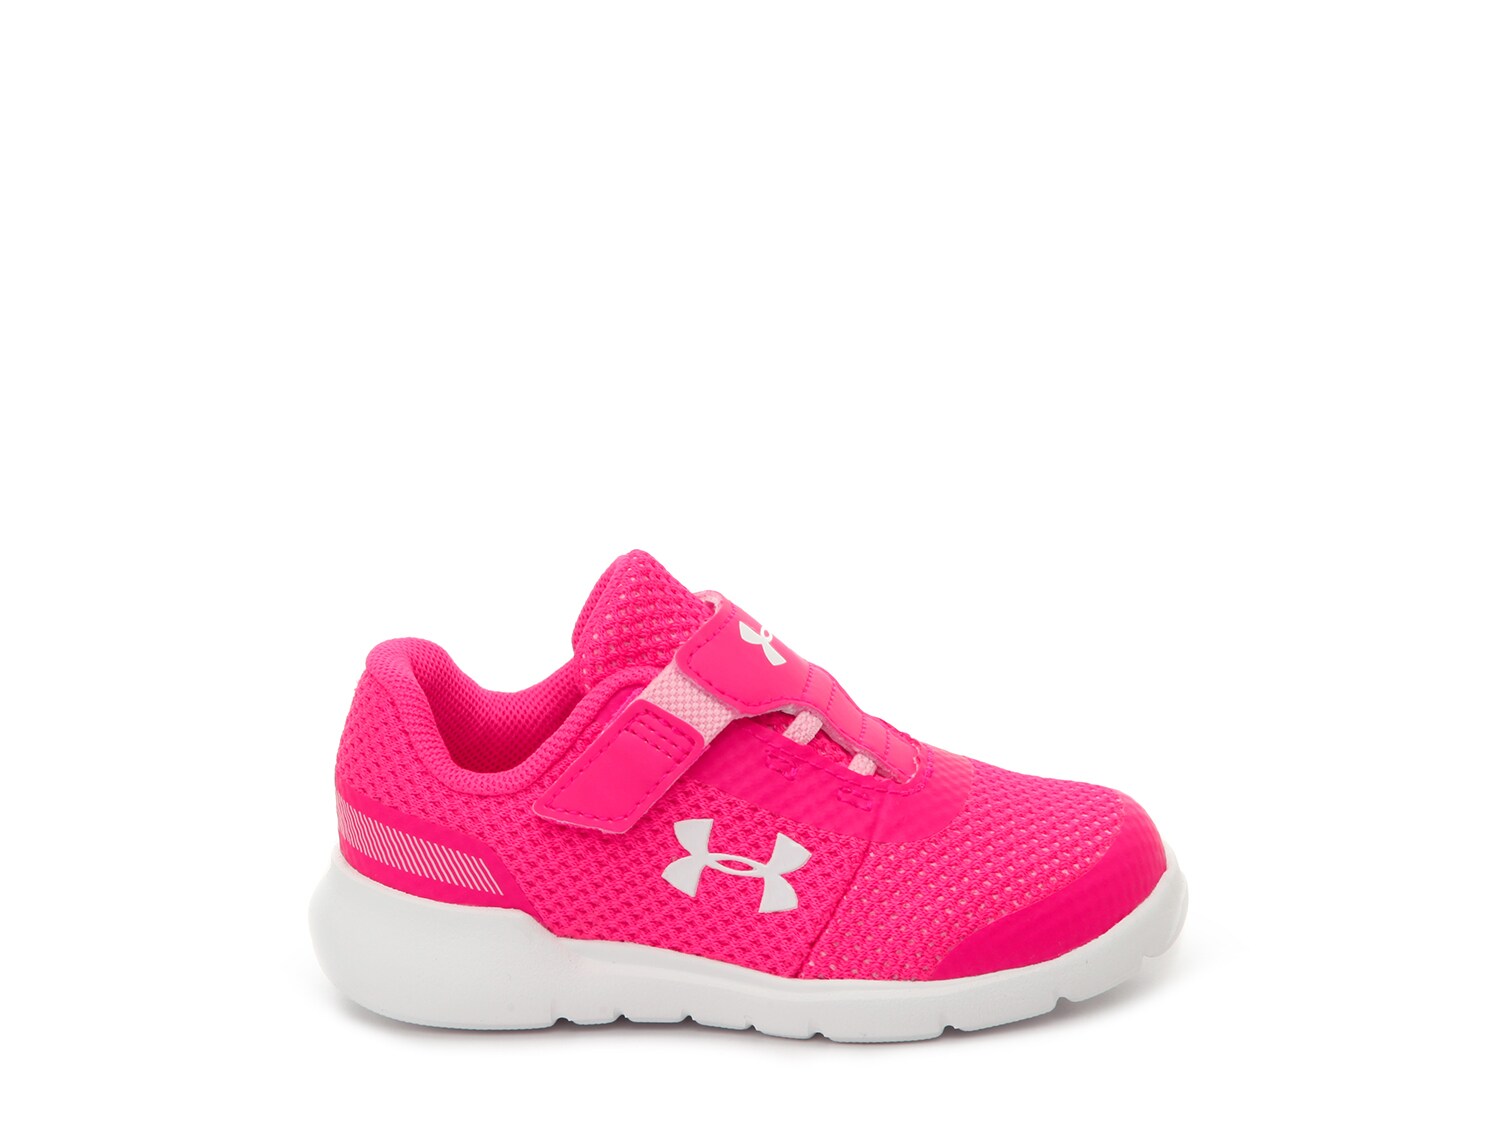 under armour wedge sneakers